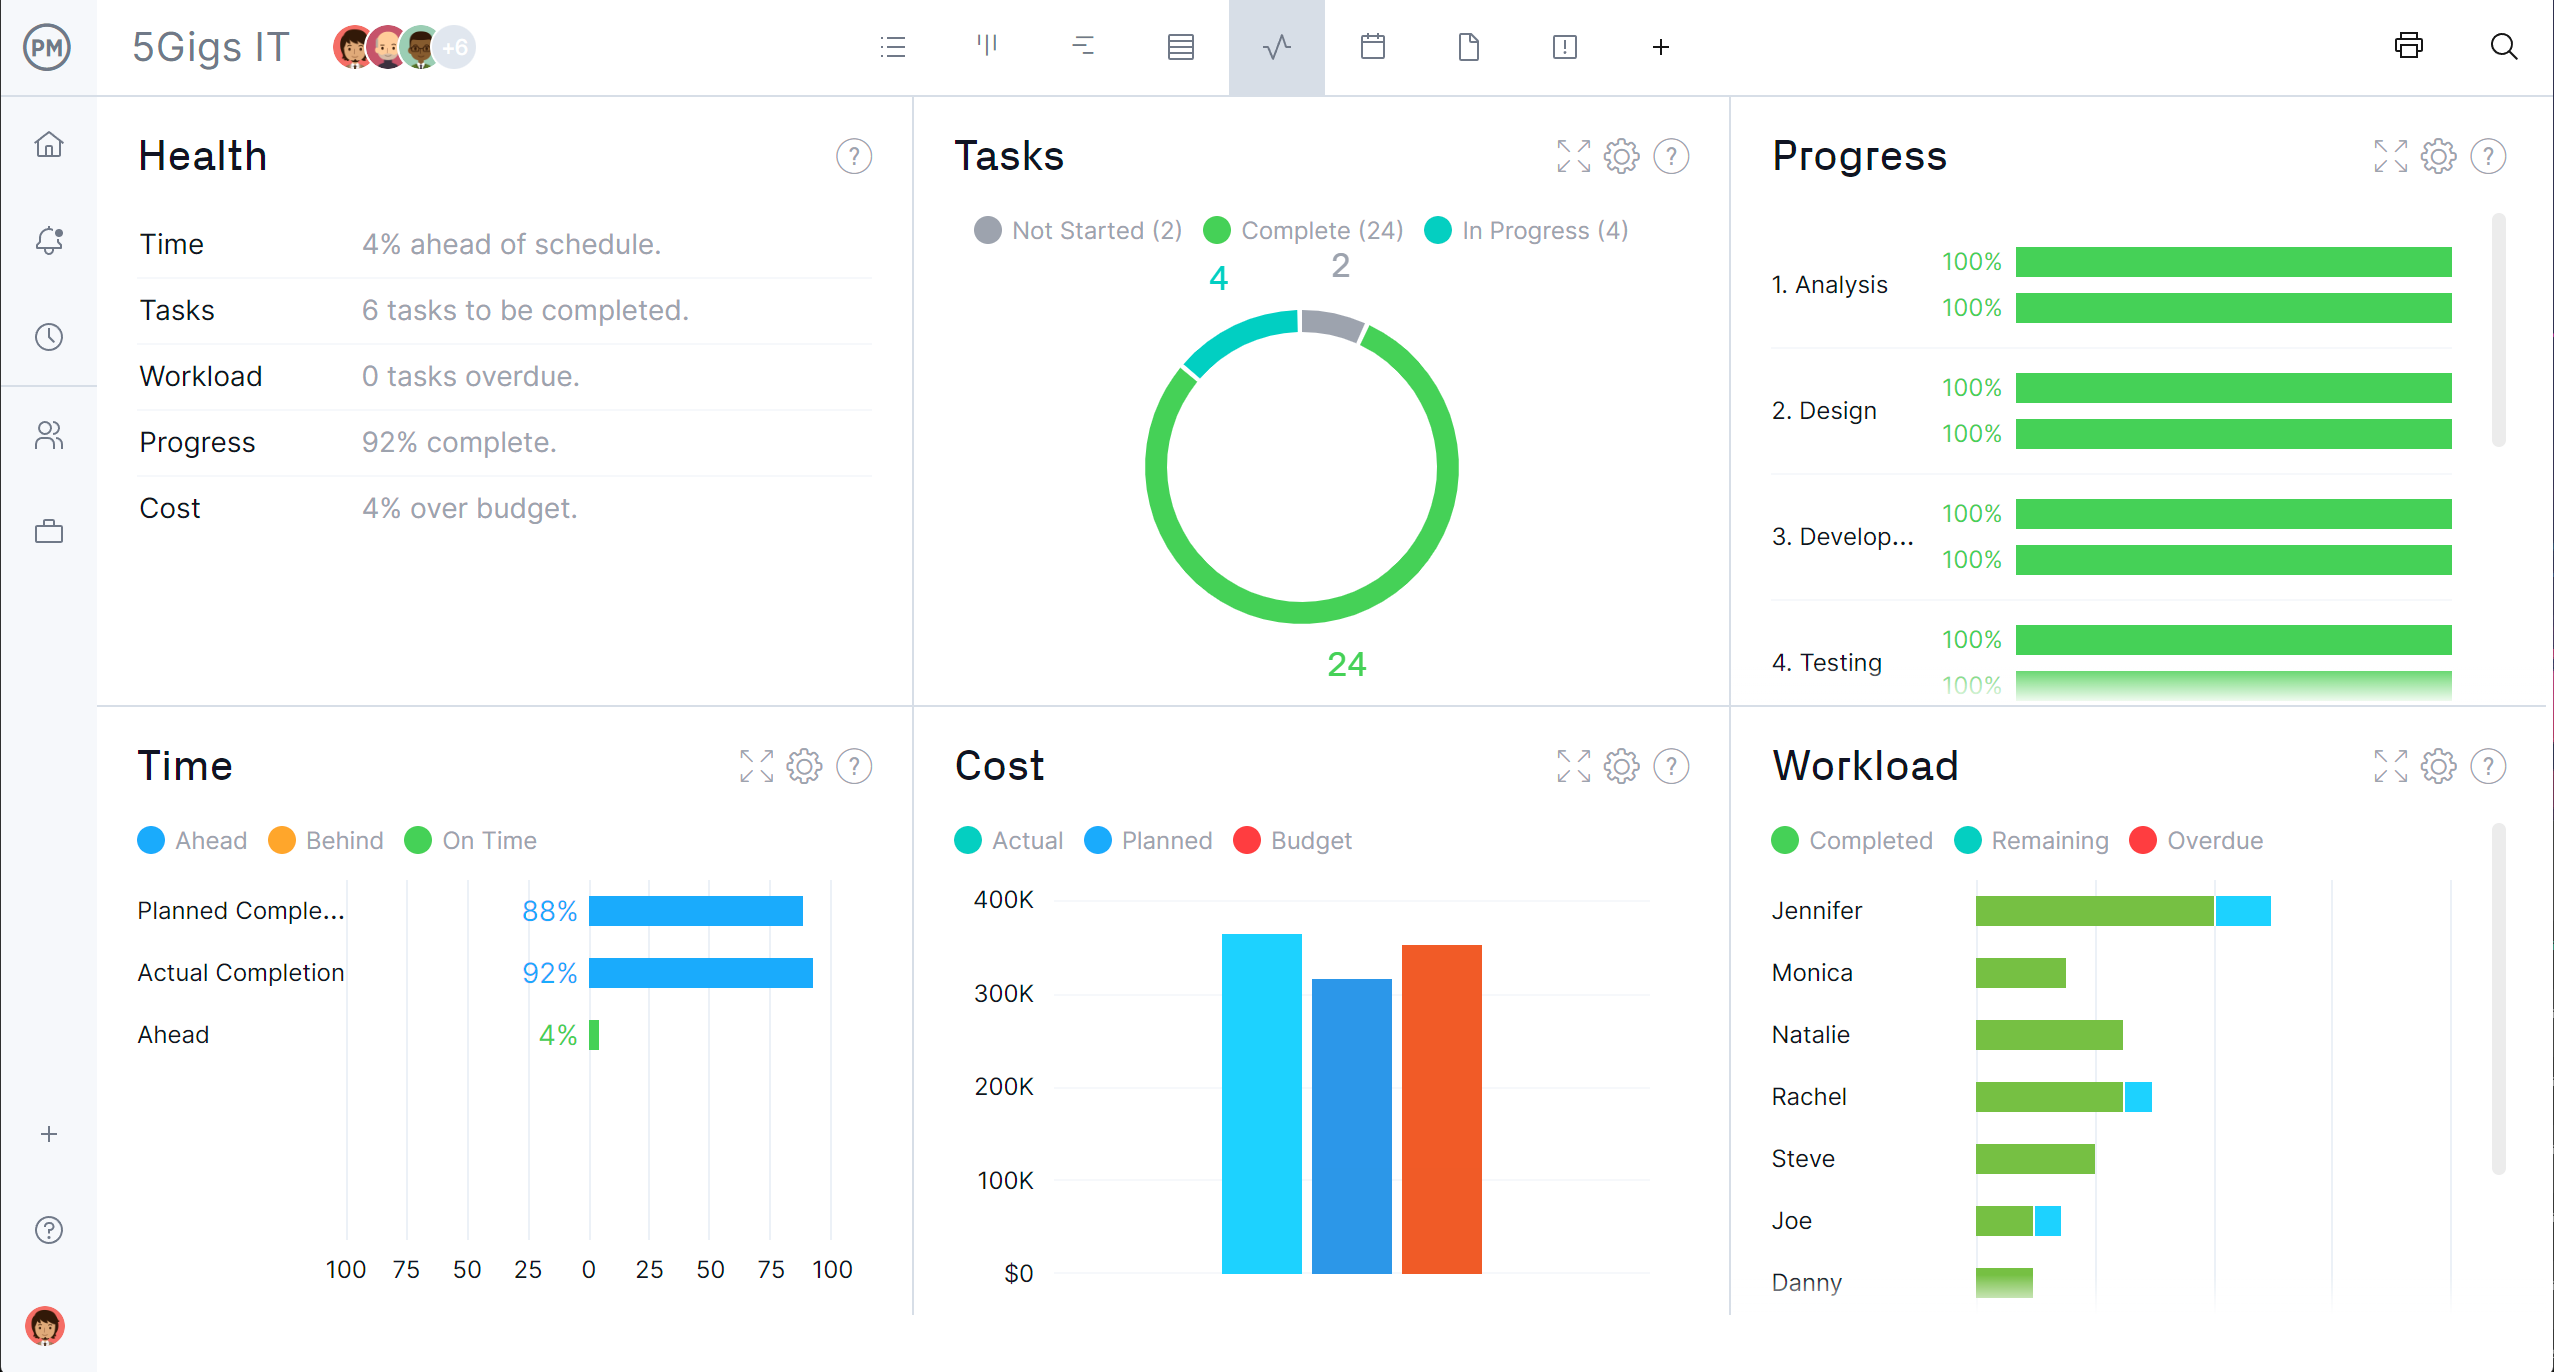 ProjectManager's dashboard